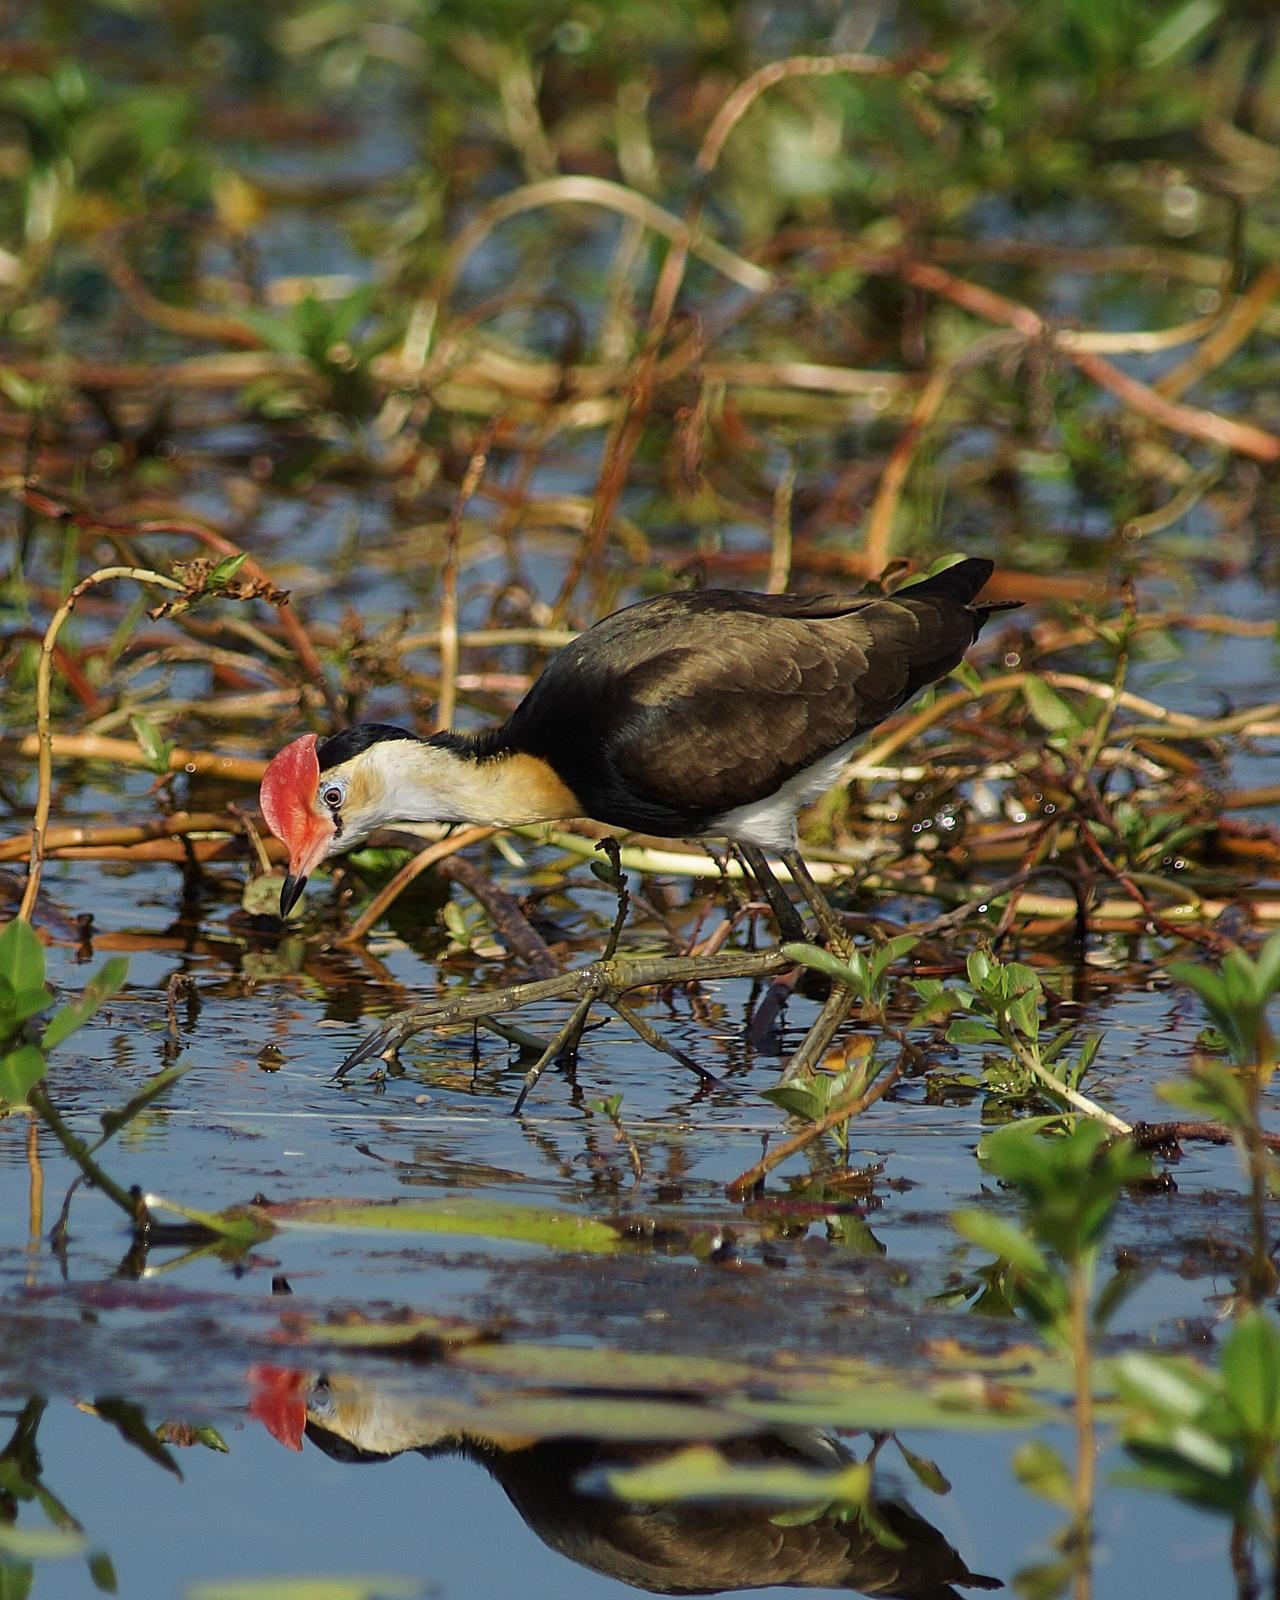 Comb-crested Jacana Photo by Steve Percival